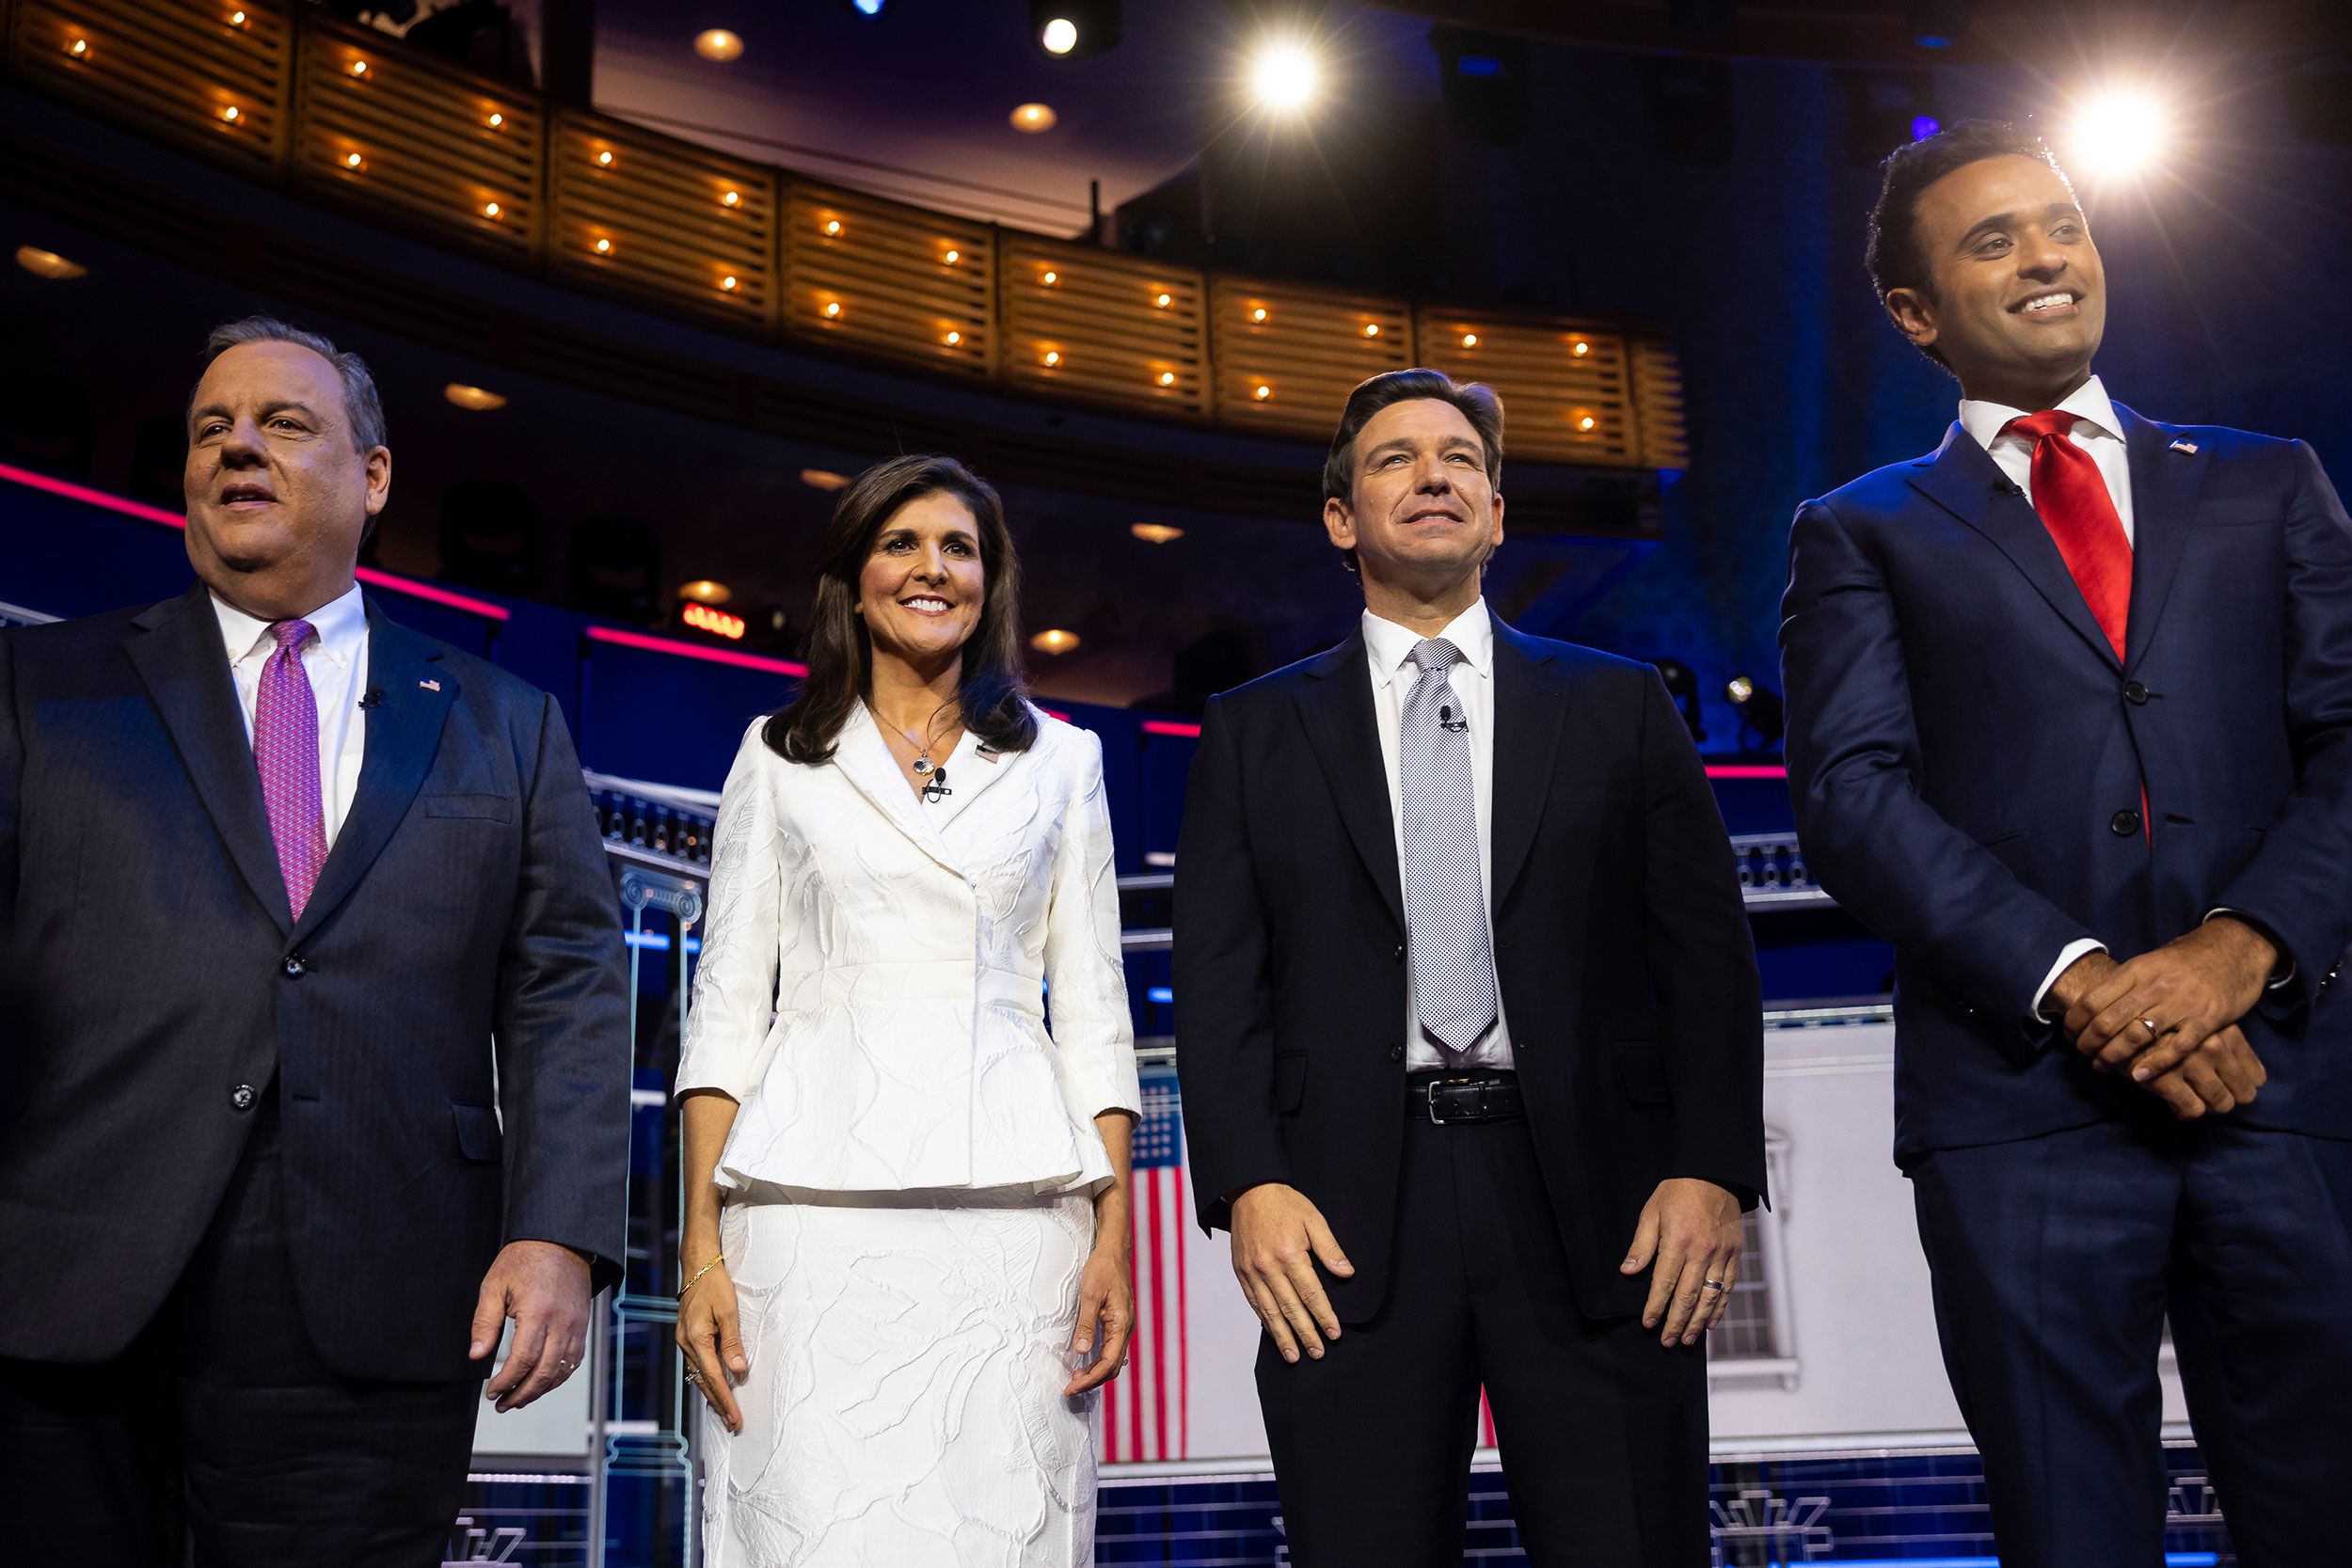 From left, Republican presidential candidates Chris Christie, Nikki Haley, Ron DeSantis, Vivek Ramaswamy are seen as they take the stage for the third 2024 Republican presidential primary debate at the Adrienne Arsht Center for the Performing Arts in Miami, Florida, on November 8.